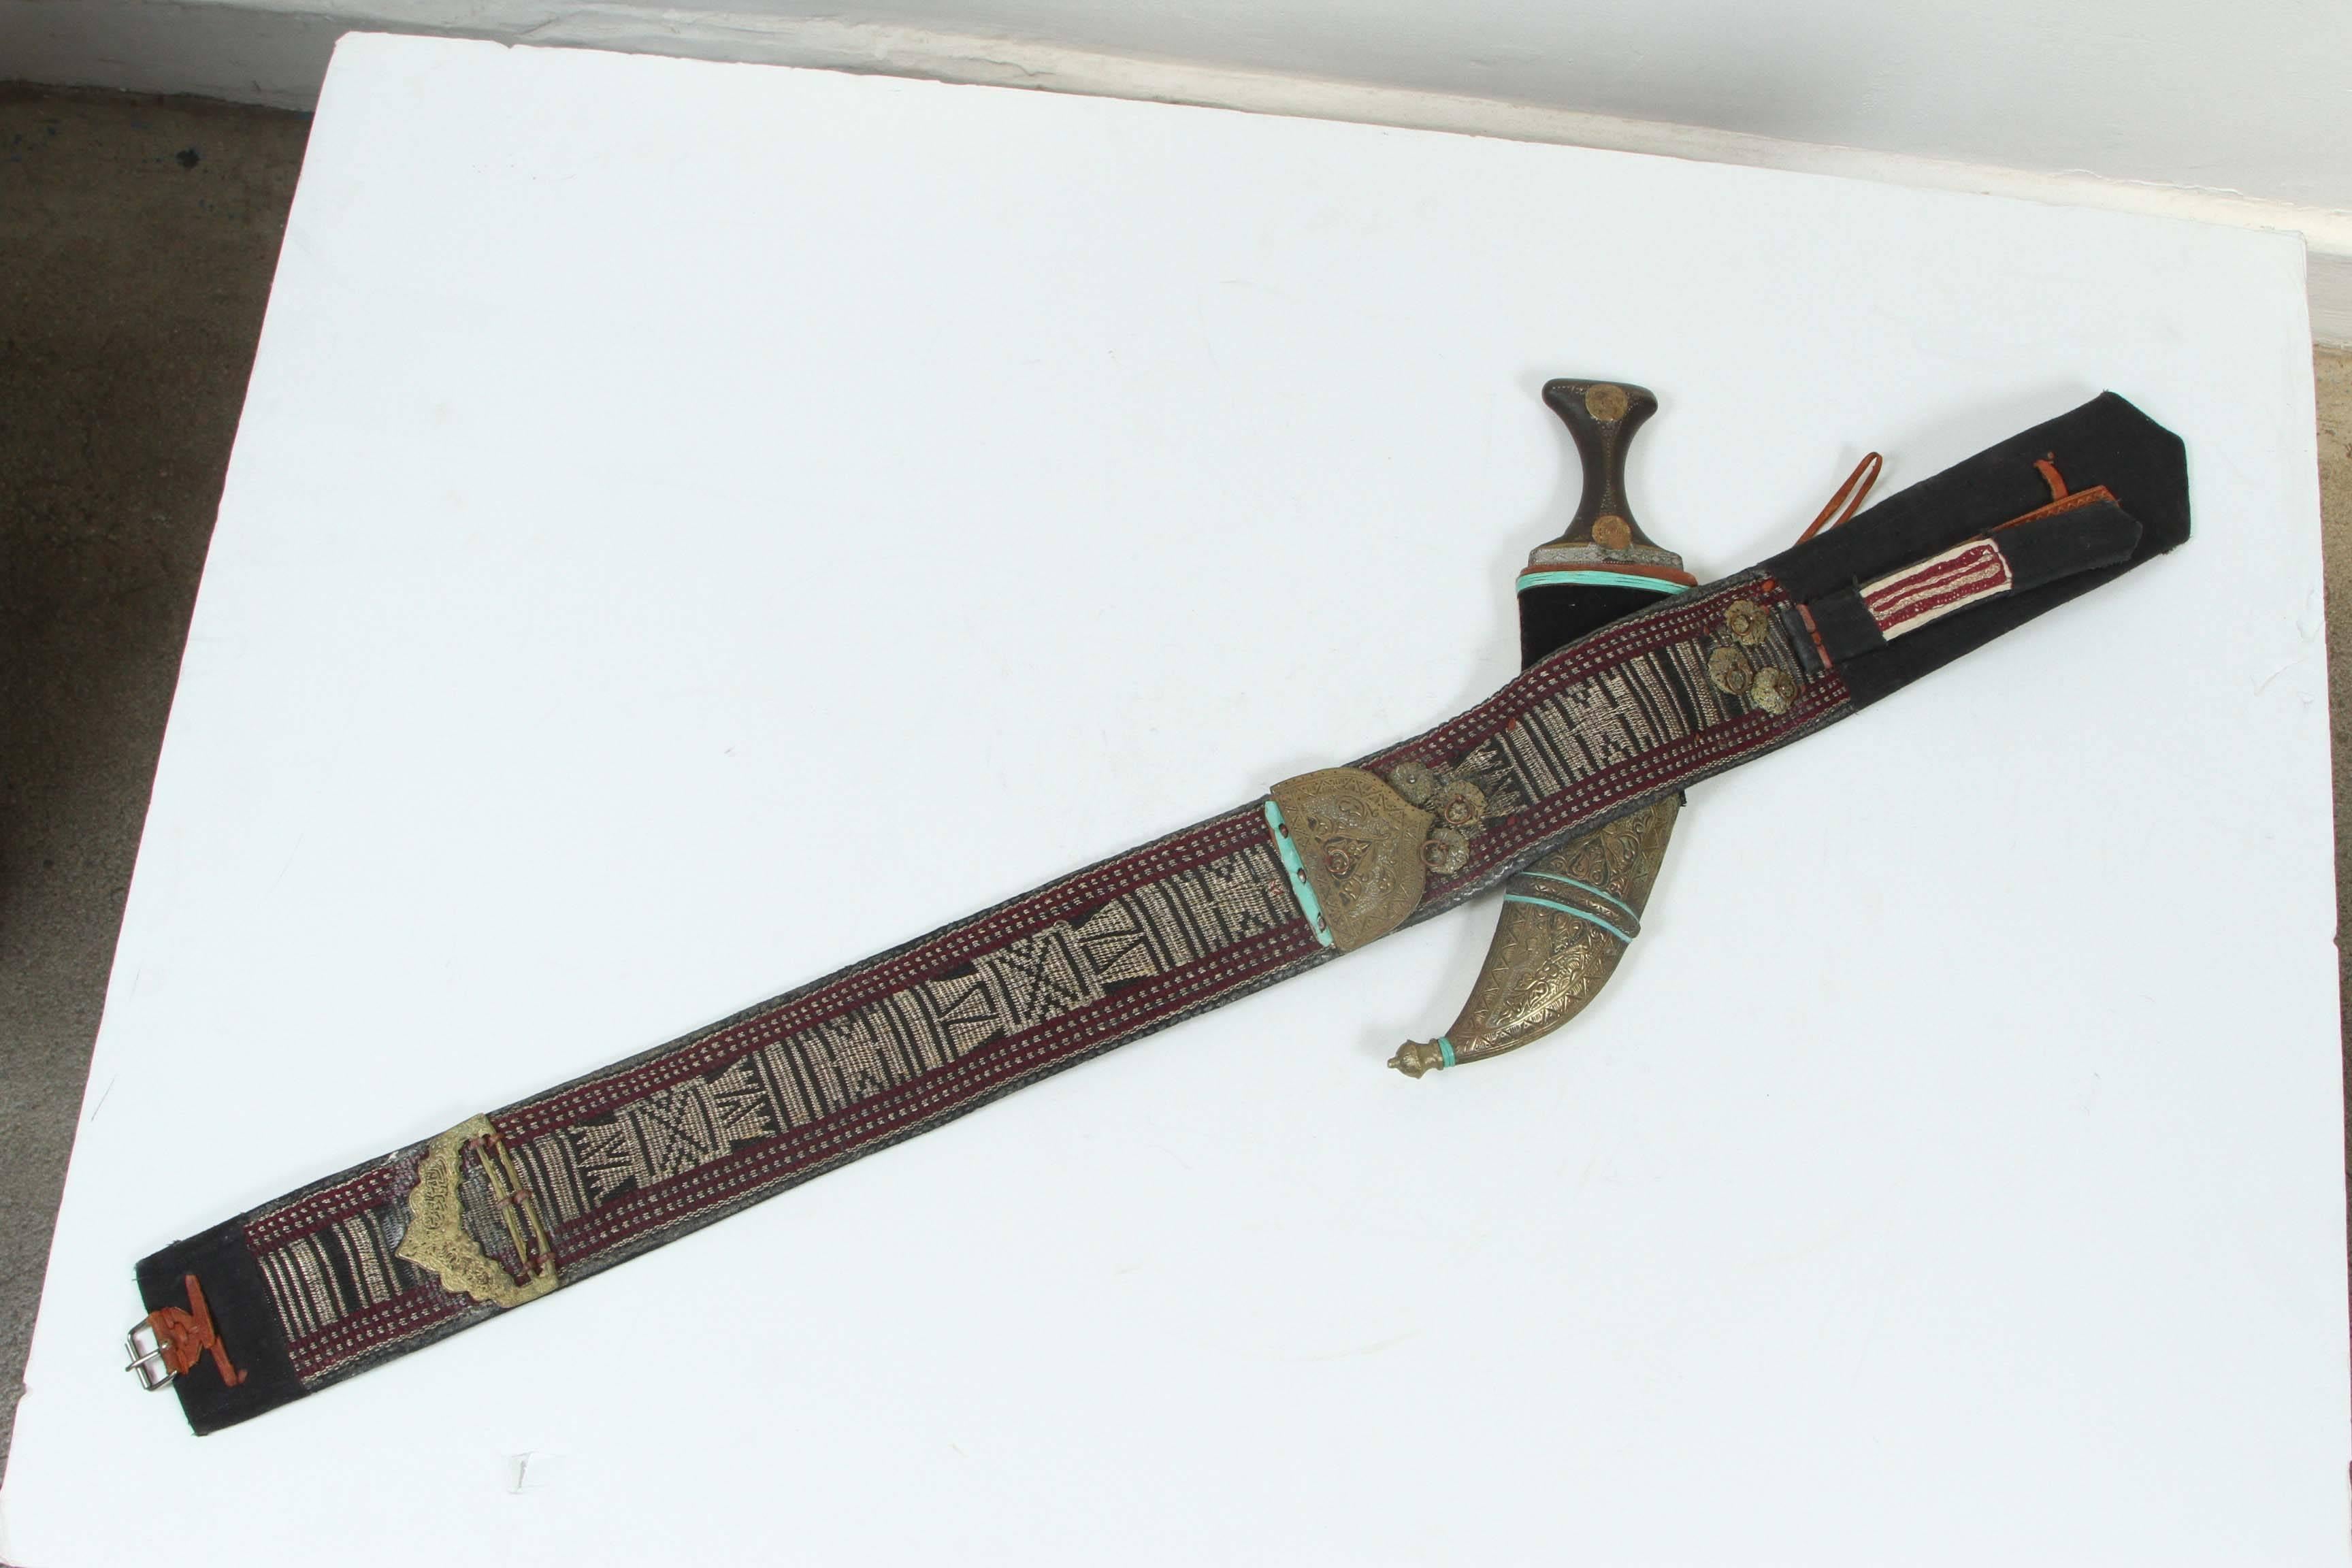 Middle Eastern Yemeni Jambiya, which is the name for the Arabic dagger.
Comes with a very thick hand embroidered belt with intricate designs and ornate with brass hammered element with calligraphy scripts.
The dagger is curved with a tick double